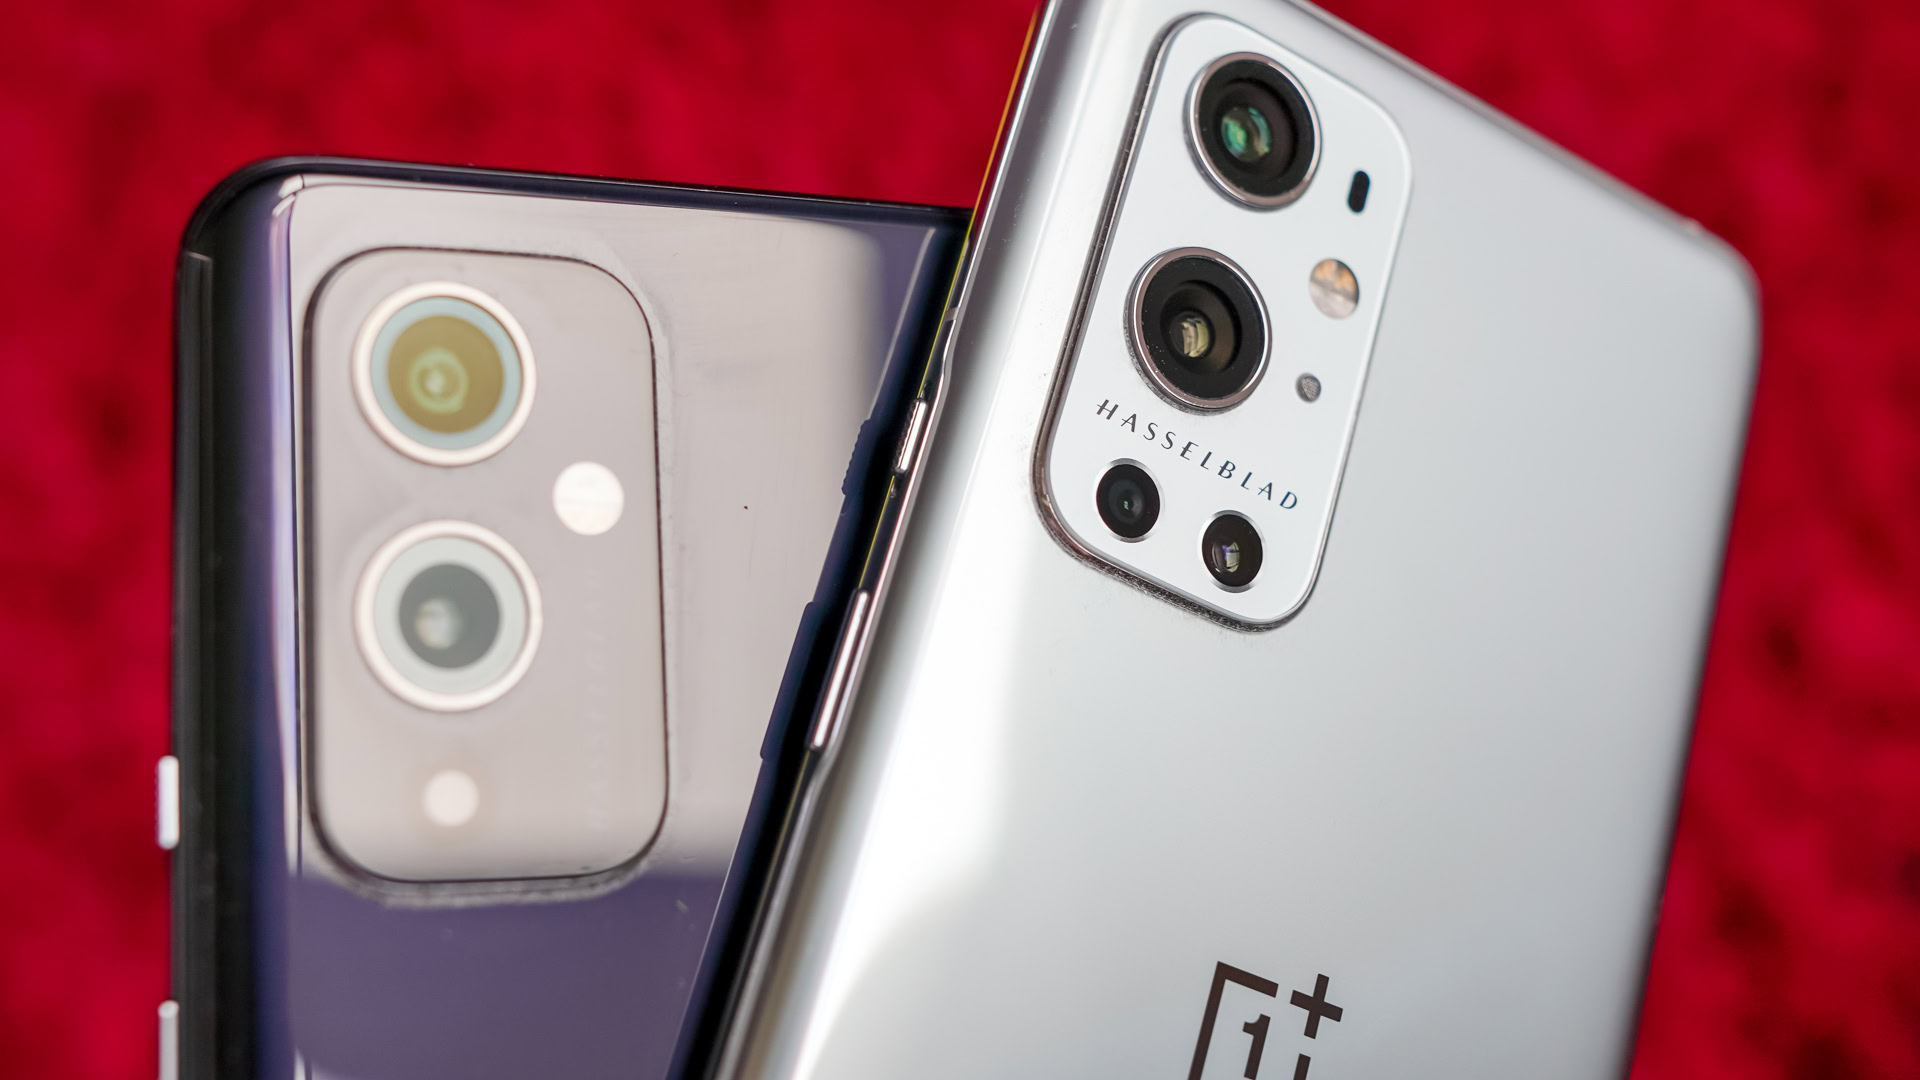 OnePlus 9 and OnePlus 9 Pro Review: Better Cameras